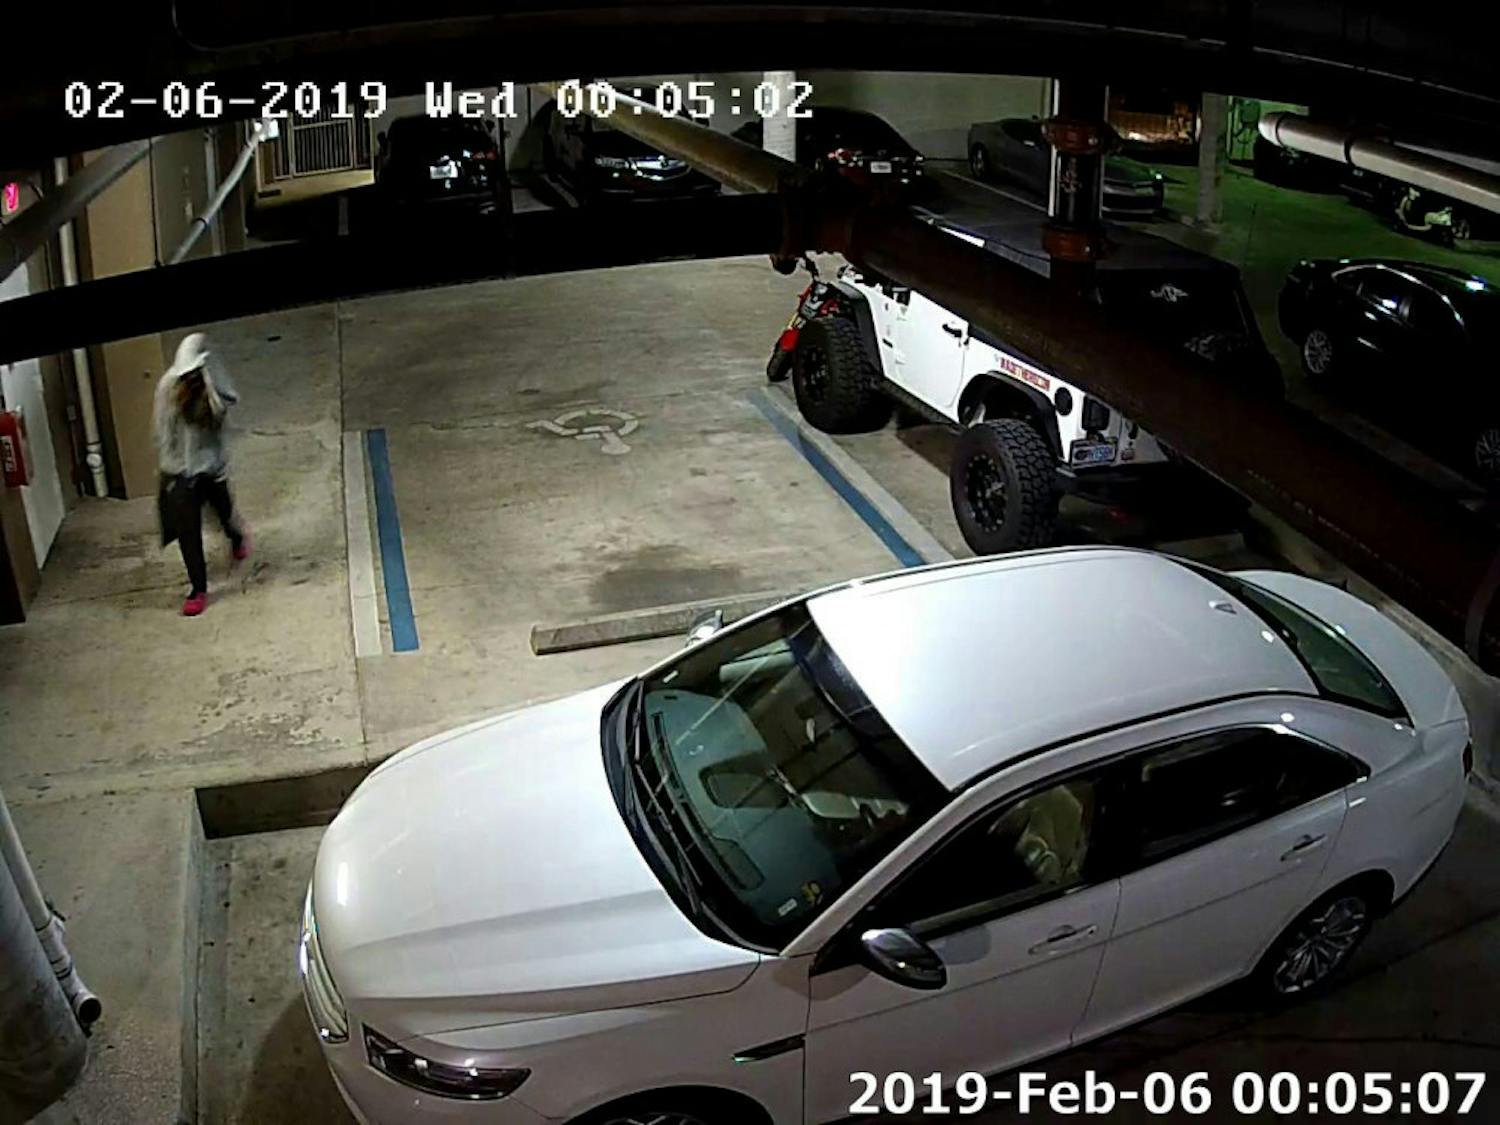 Alachua County Animal Services is looking for woman suspected of killing a cat and placing it in a bag and on someone's car.